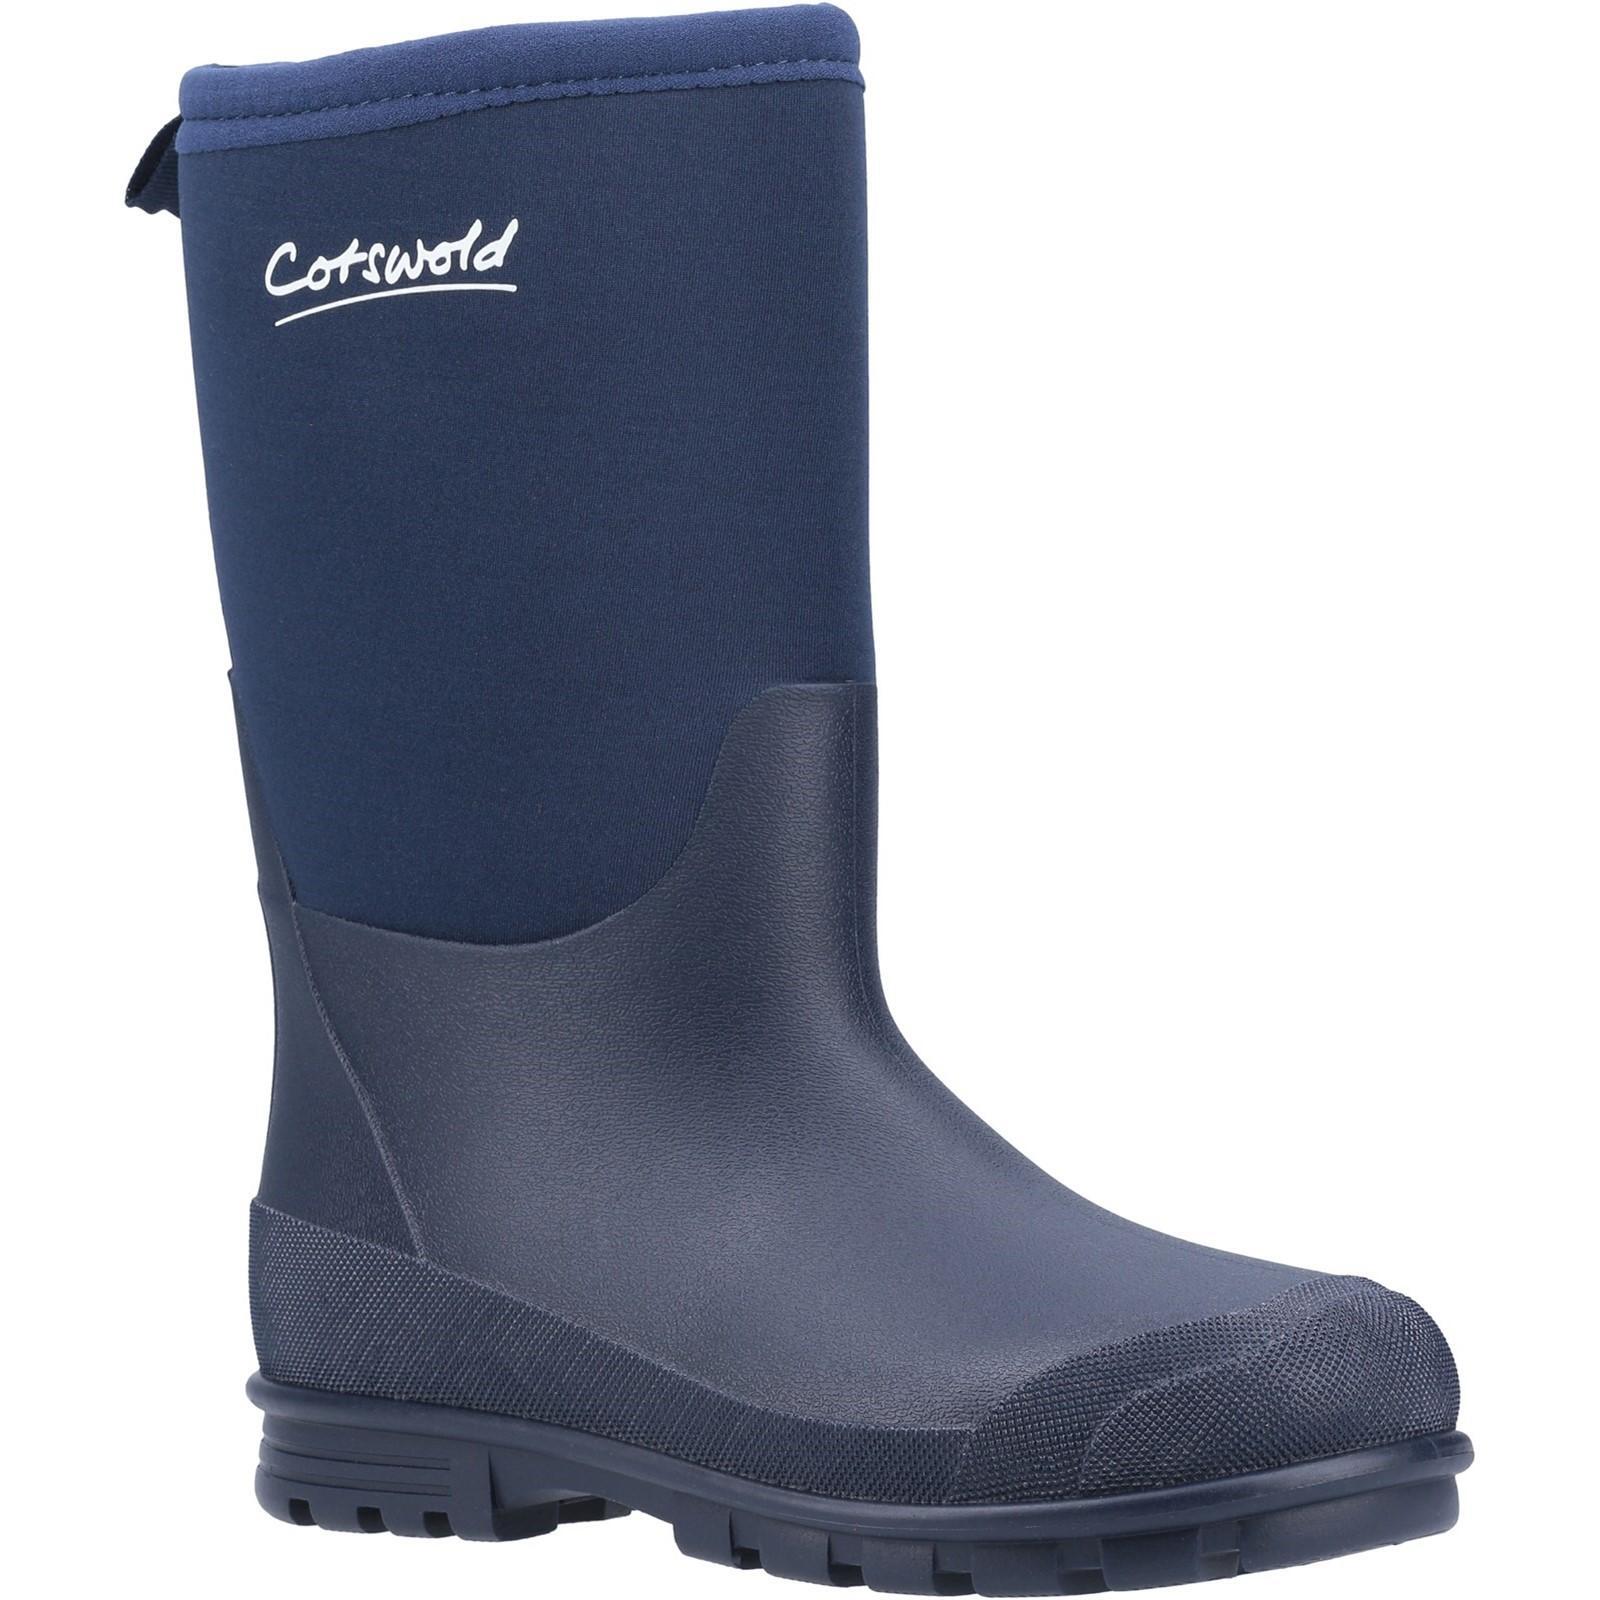 COTSWOLD Childrens/Kids Hilly Neoprene Wellington Boots (Blue)